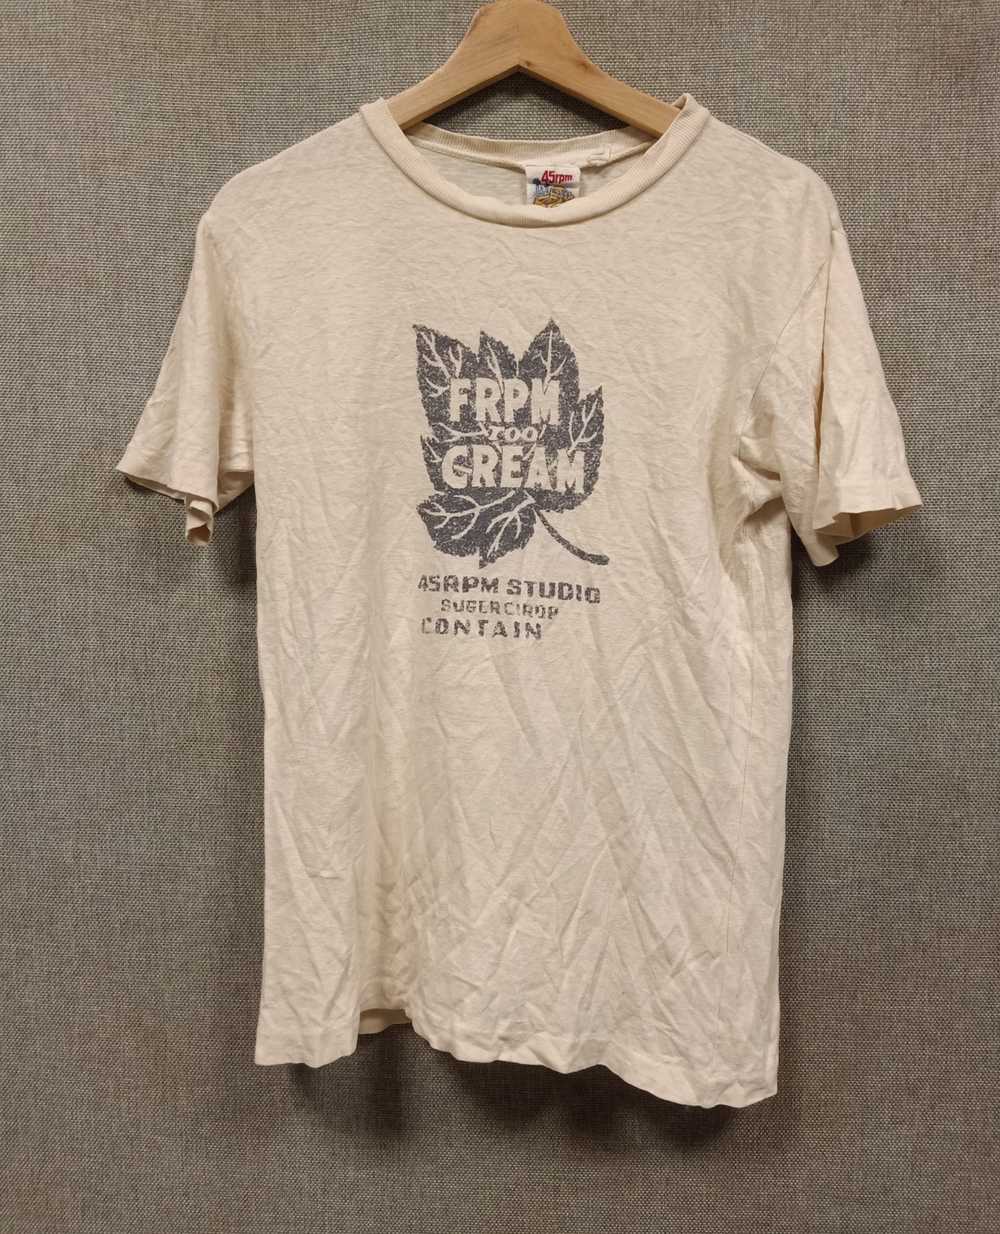 45rpm × Vintage Vintage 90s t shirt 45rpm made in… - image 1